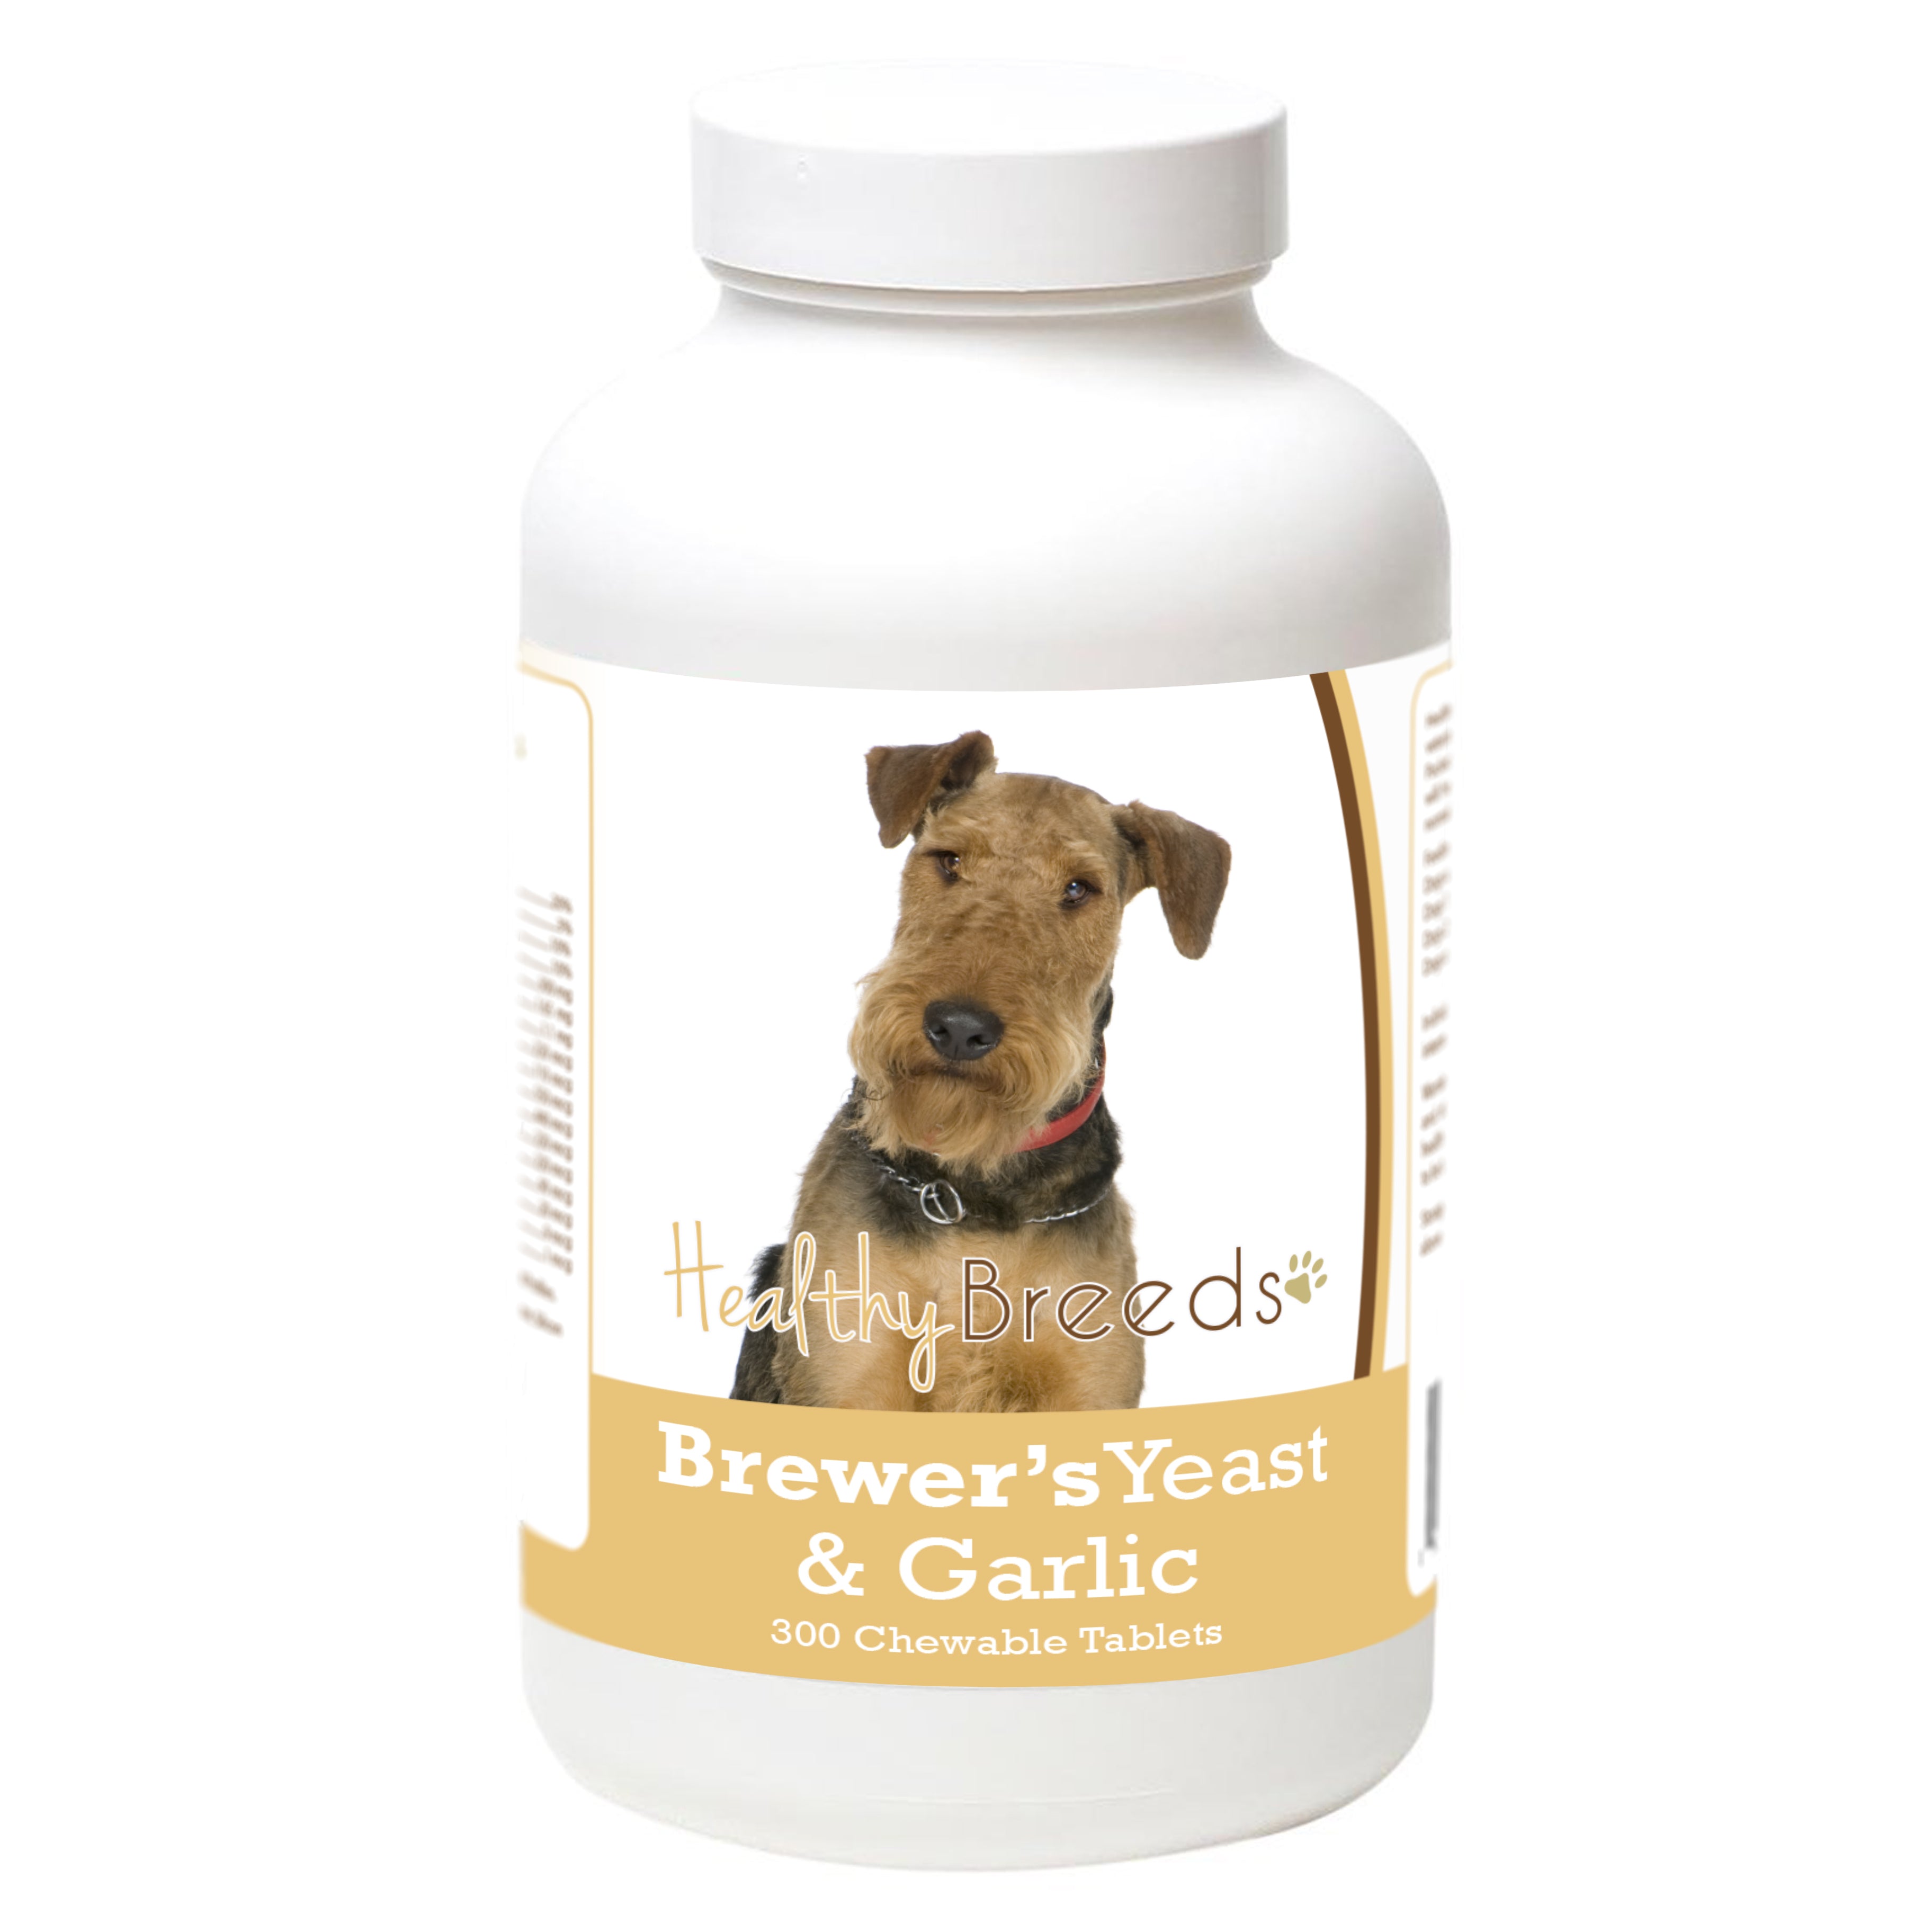 Airedale Terrier Brewers Yeast Tablets 300 Count